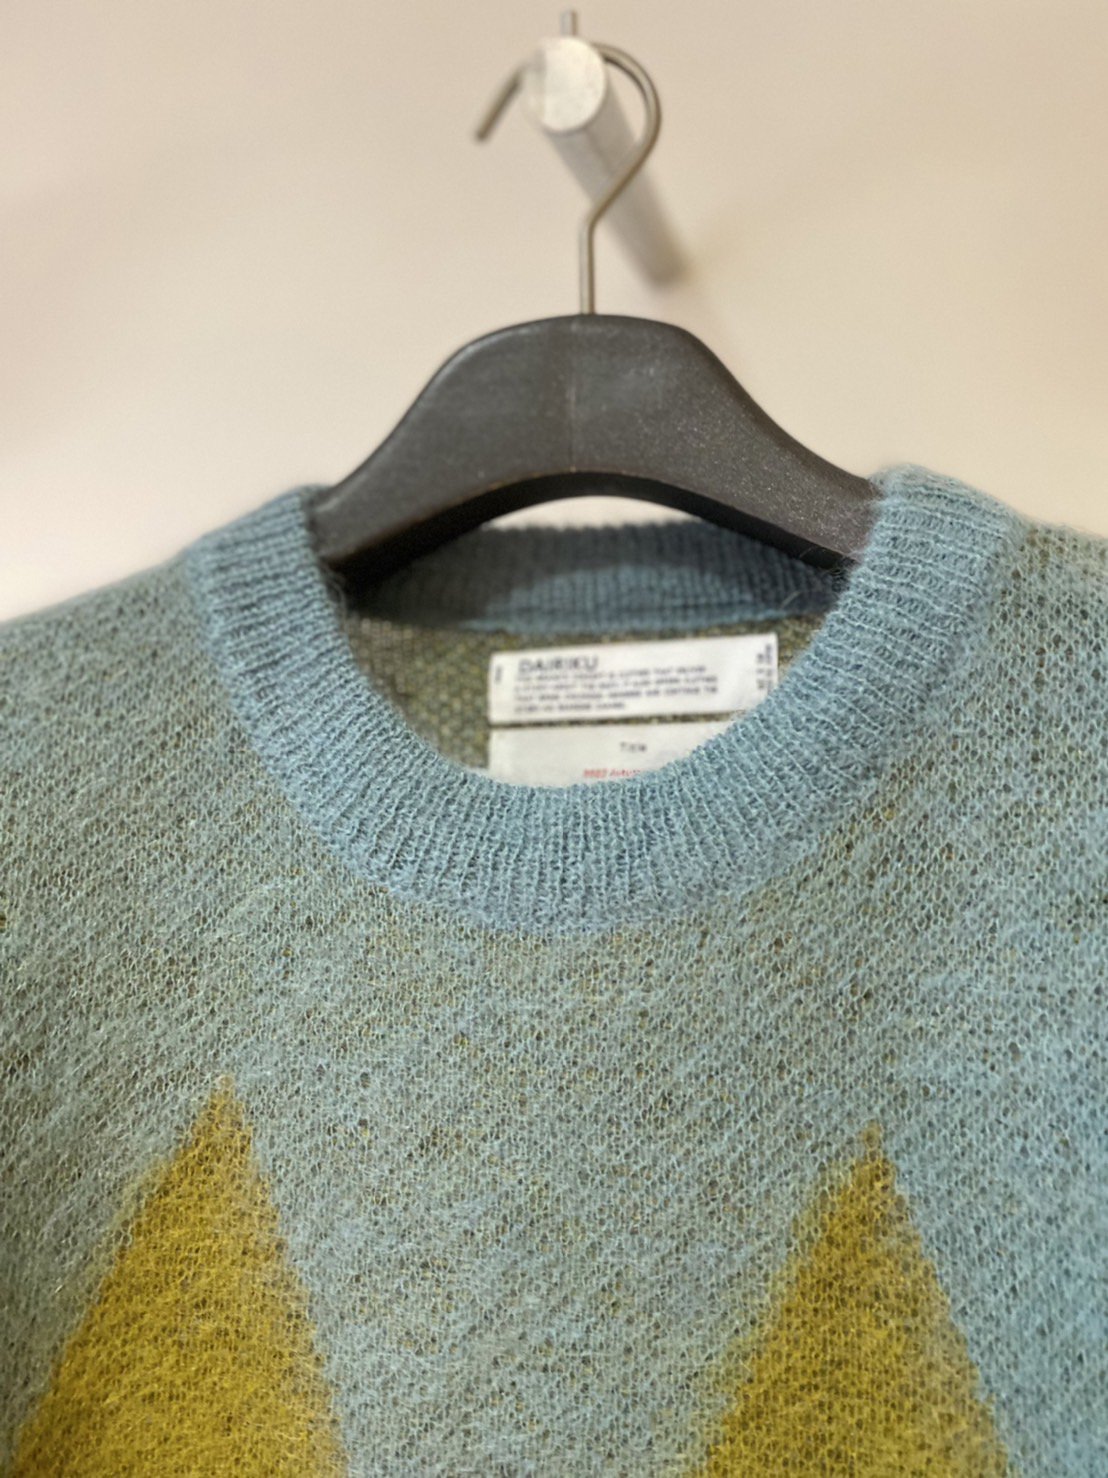 DAIRIKU<br />Argyle Mohair Pullover Knit / Mint Green<img class='new_mark_img2' src='https://img.shop-pro.jp/img/new/icons14.gif' style='border:none;display:inline;margin:0px;padding:0px;width:auto;' />